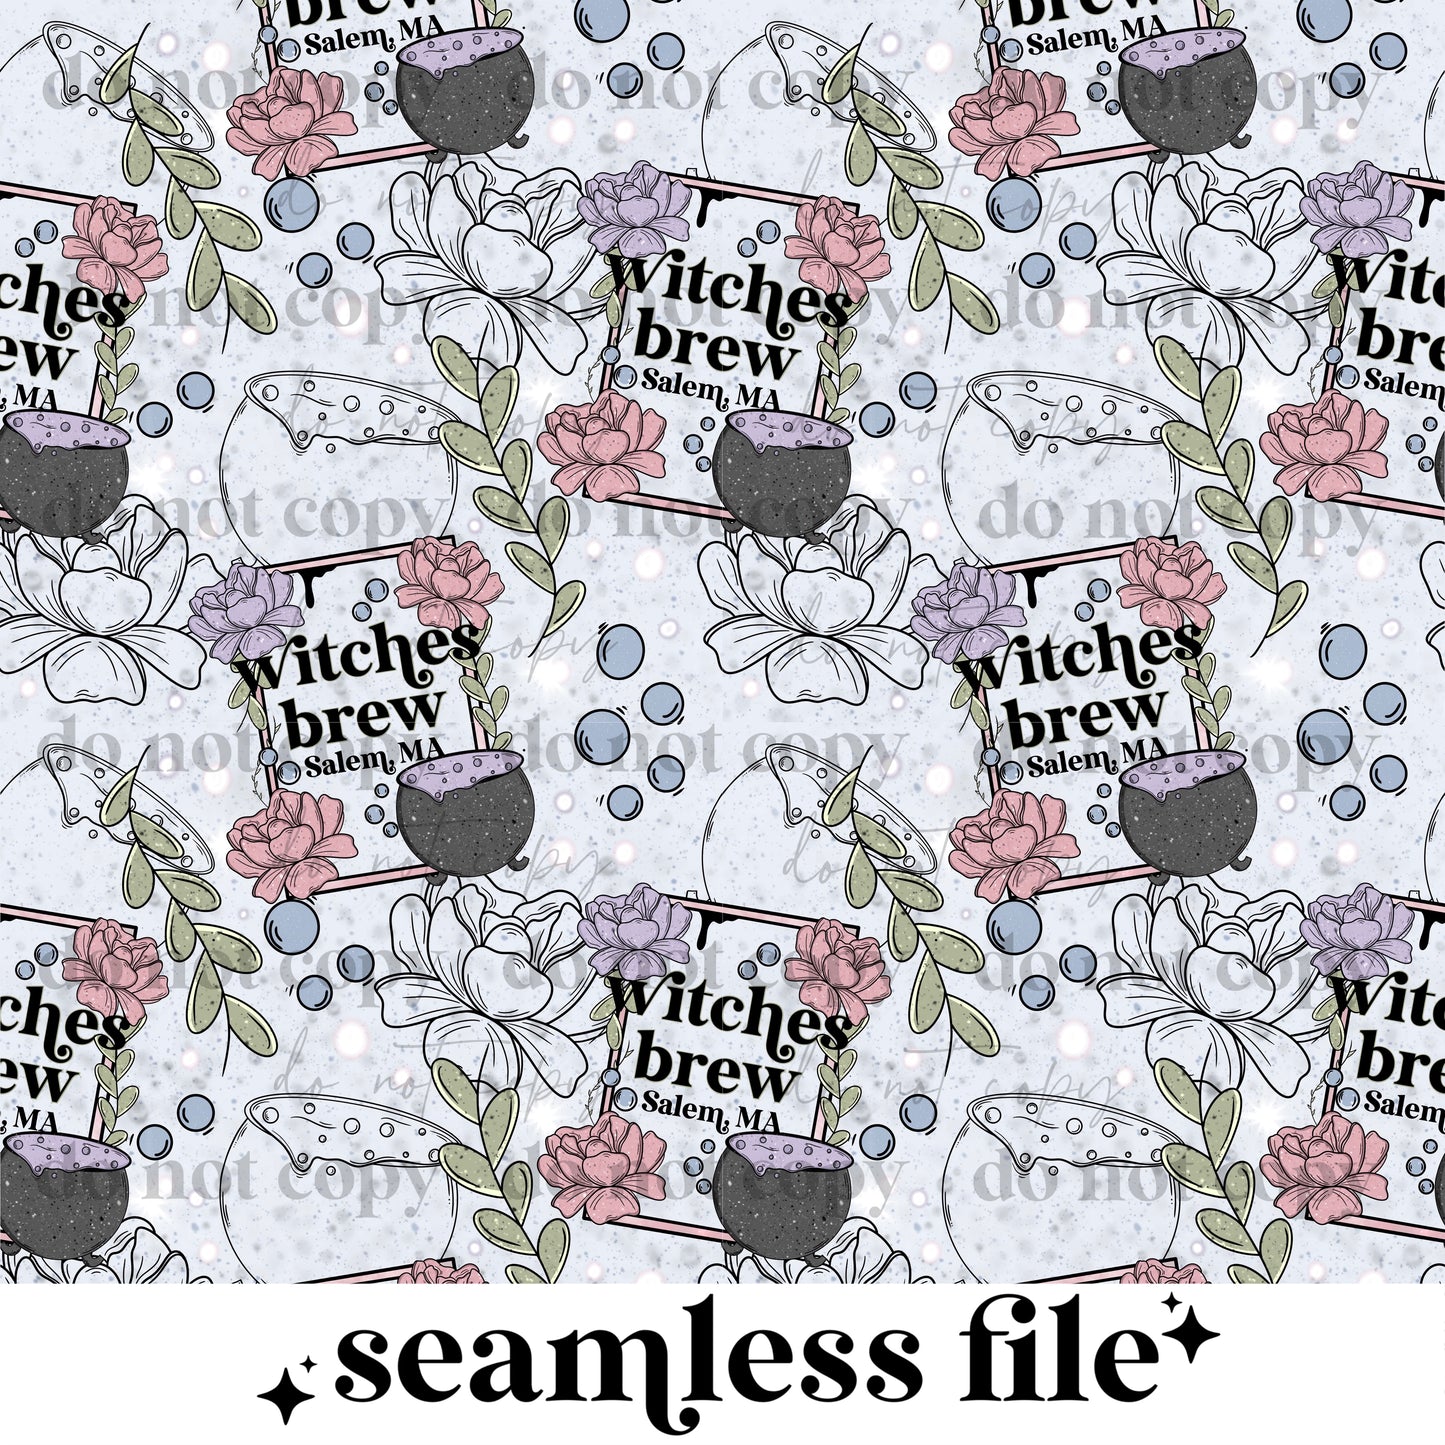 Witches brew seamless